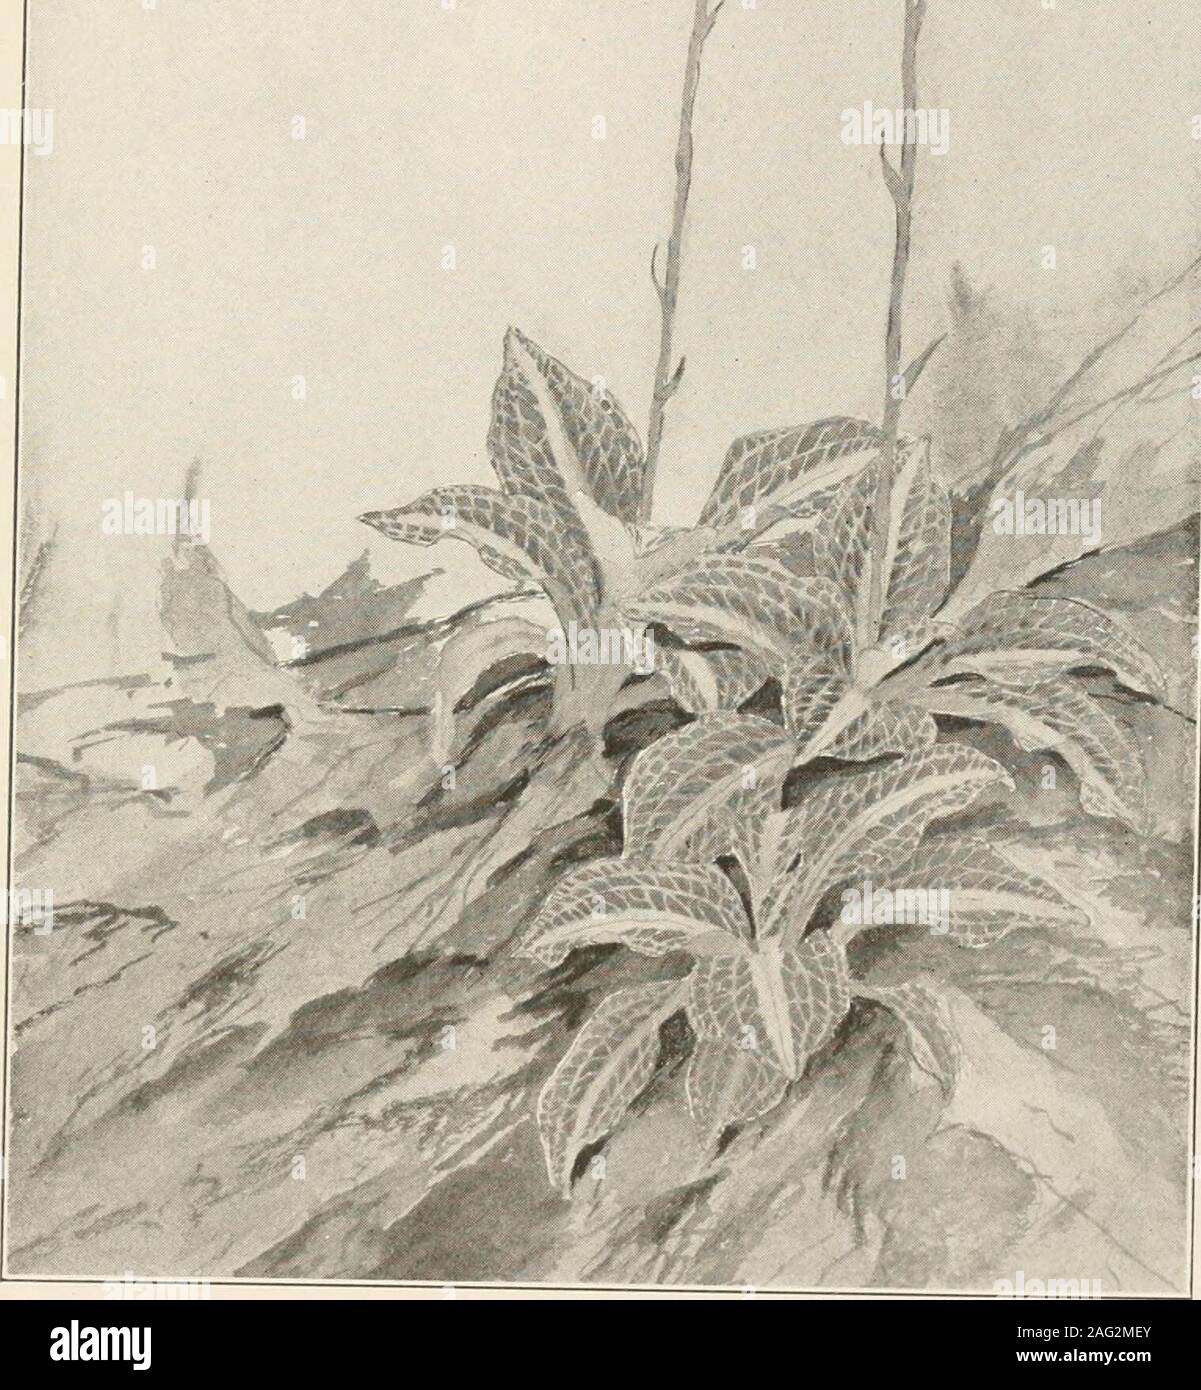 . The plants of southern New Jersey; with especial reference to the flora of the pine barrens and the geographic distribution of the species. From Painting by H. E. Stone. WHORLED POGONIA. Isotria verticillata. N. J. Plants. PLATE L.. From Painting by II. K. Stone. RATTLESNAKE PLANTAIN. Peramium pubescens. N. J. Plants. PLATE LI. Stock Photo